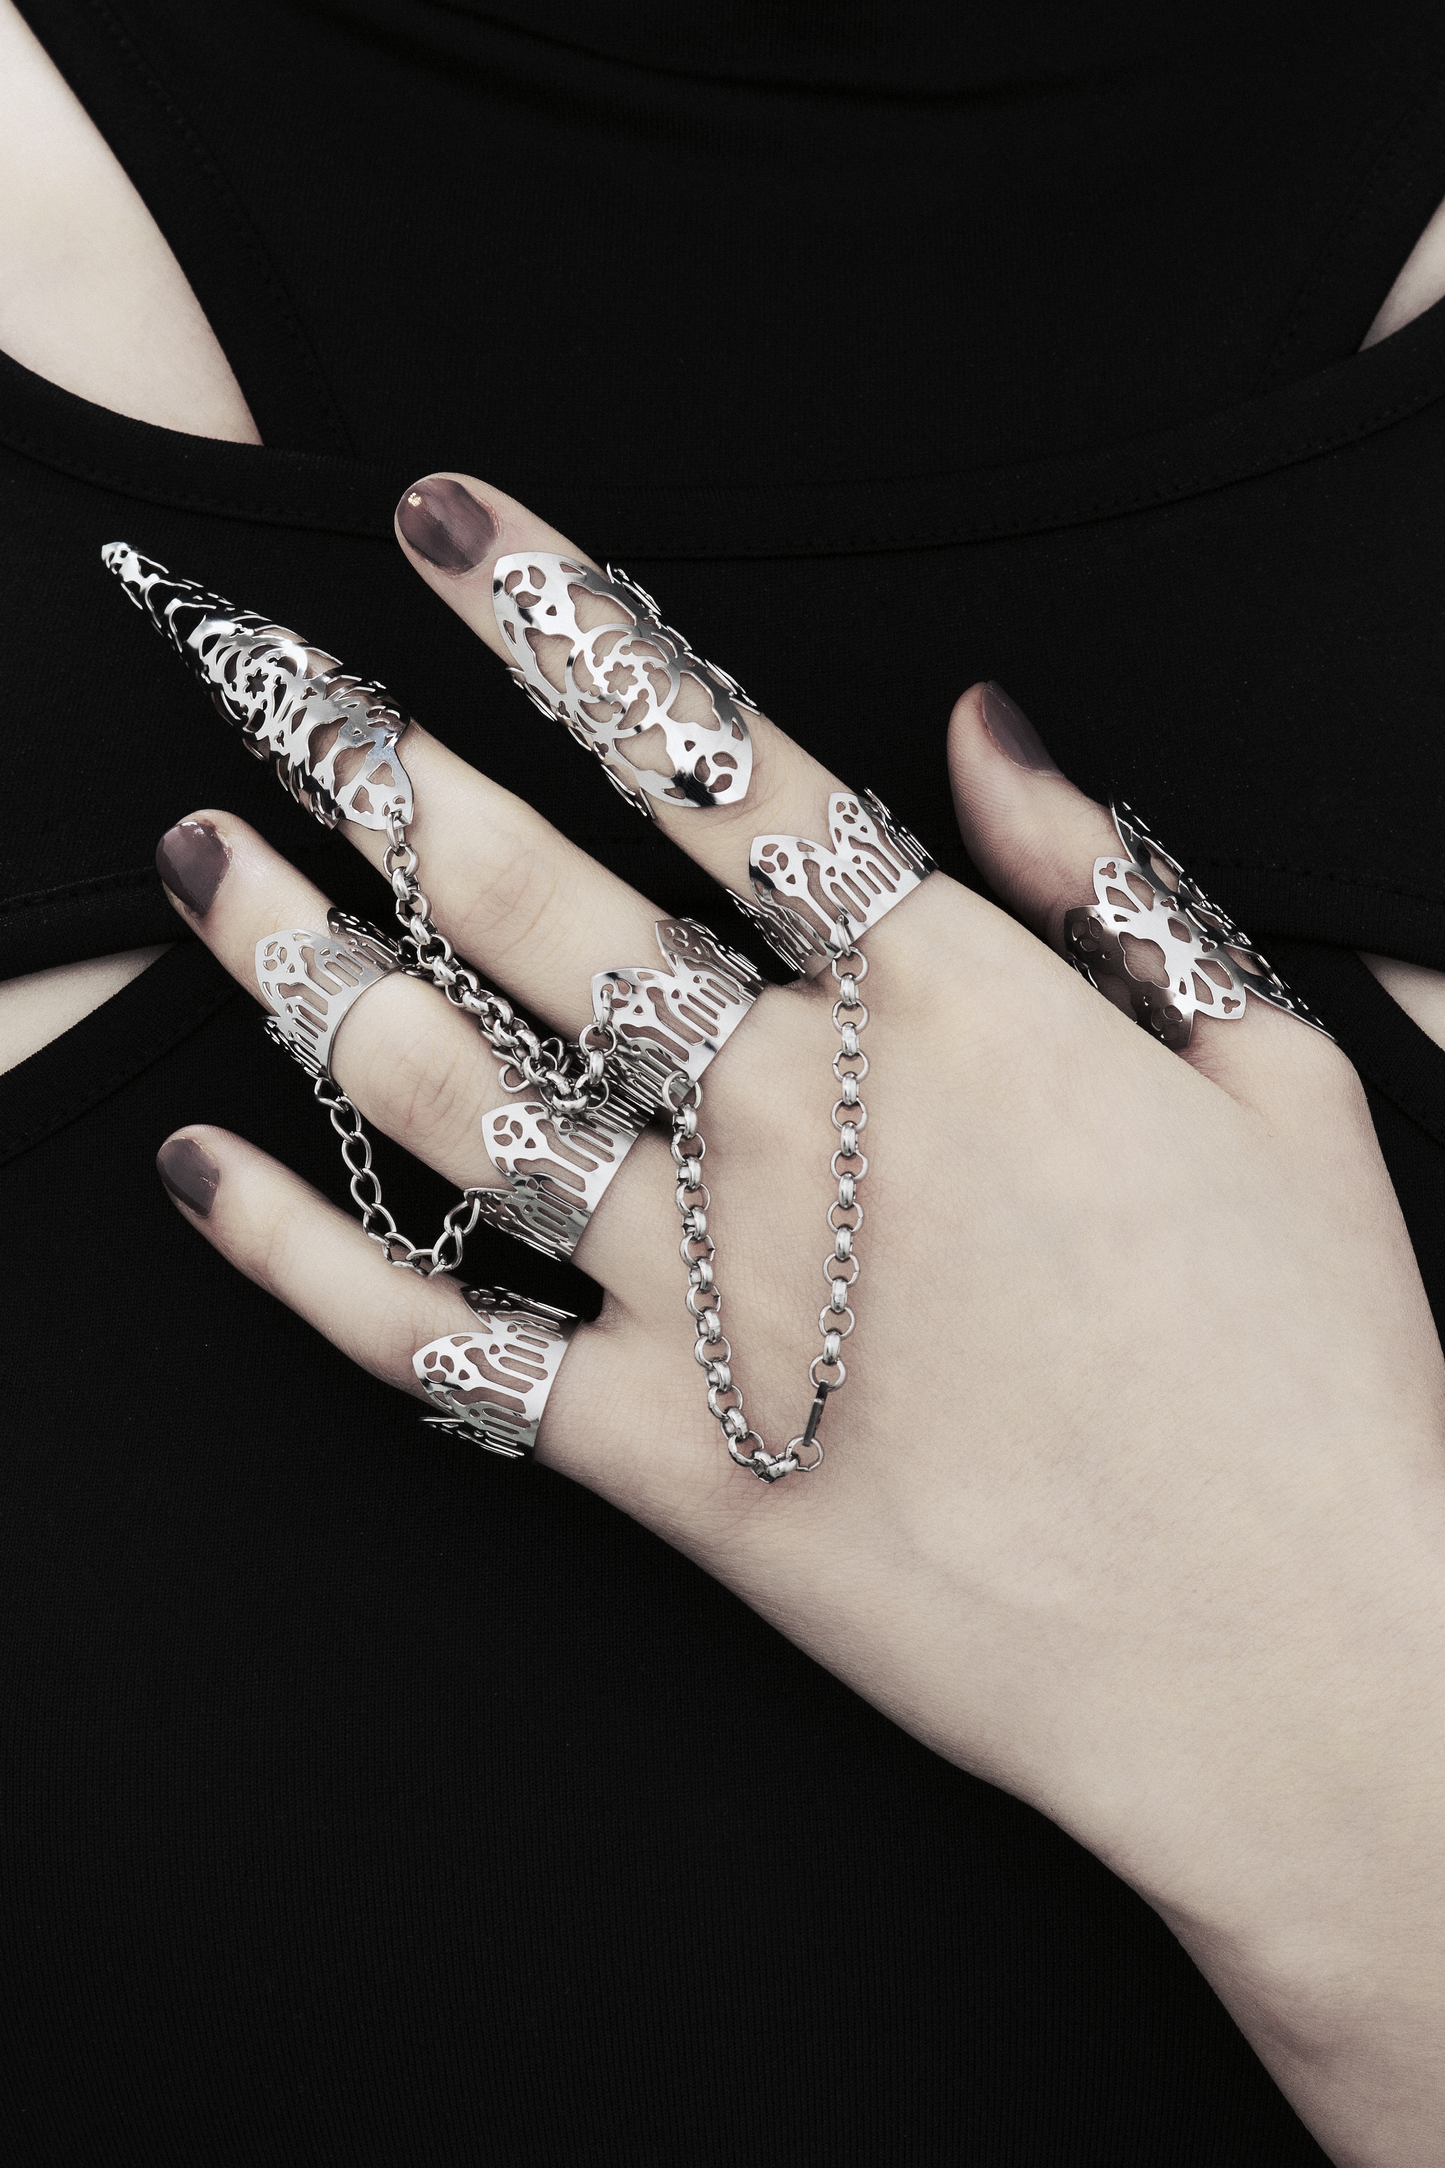 A display of Myril Jewels' handcrafted, dark-avantgarde rings on a hand, each with intricate gothic-inspired designs, ideal for aficionados of alternative and gothic styles. The rings range from slim bands to dramatic, extended pieces resembling talons, all connected by slender chains, presenting a statement of bold elegance. These Italian-made pieces embody the unique, evolving aesthetic of Myril Jewels, tailored for the discerning tastes of the gothic jewelry enthusiast.